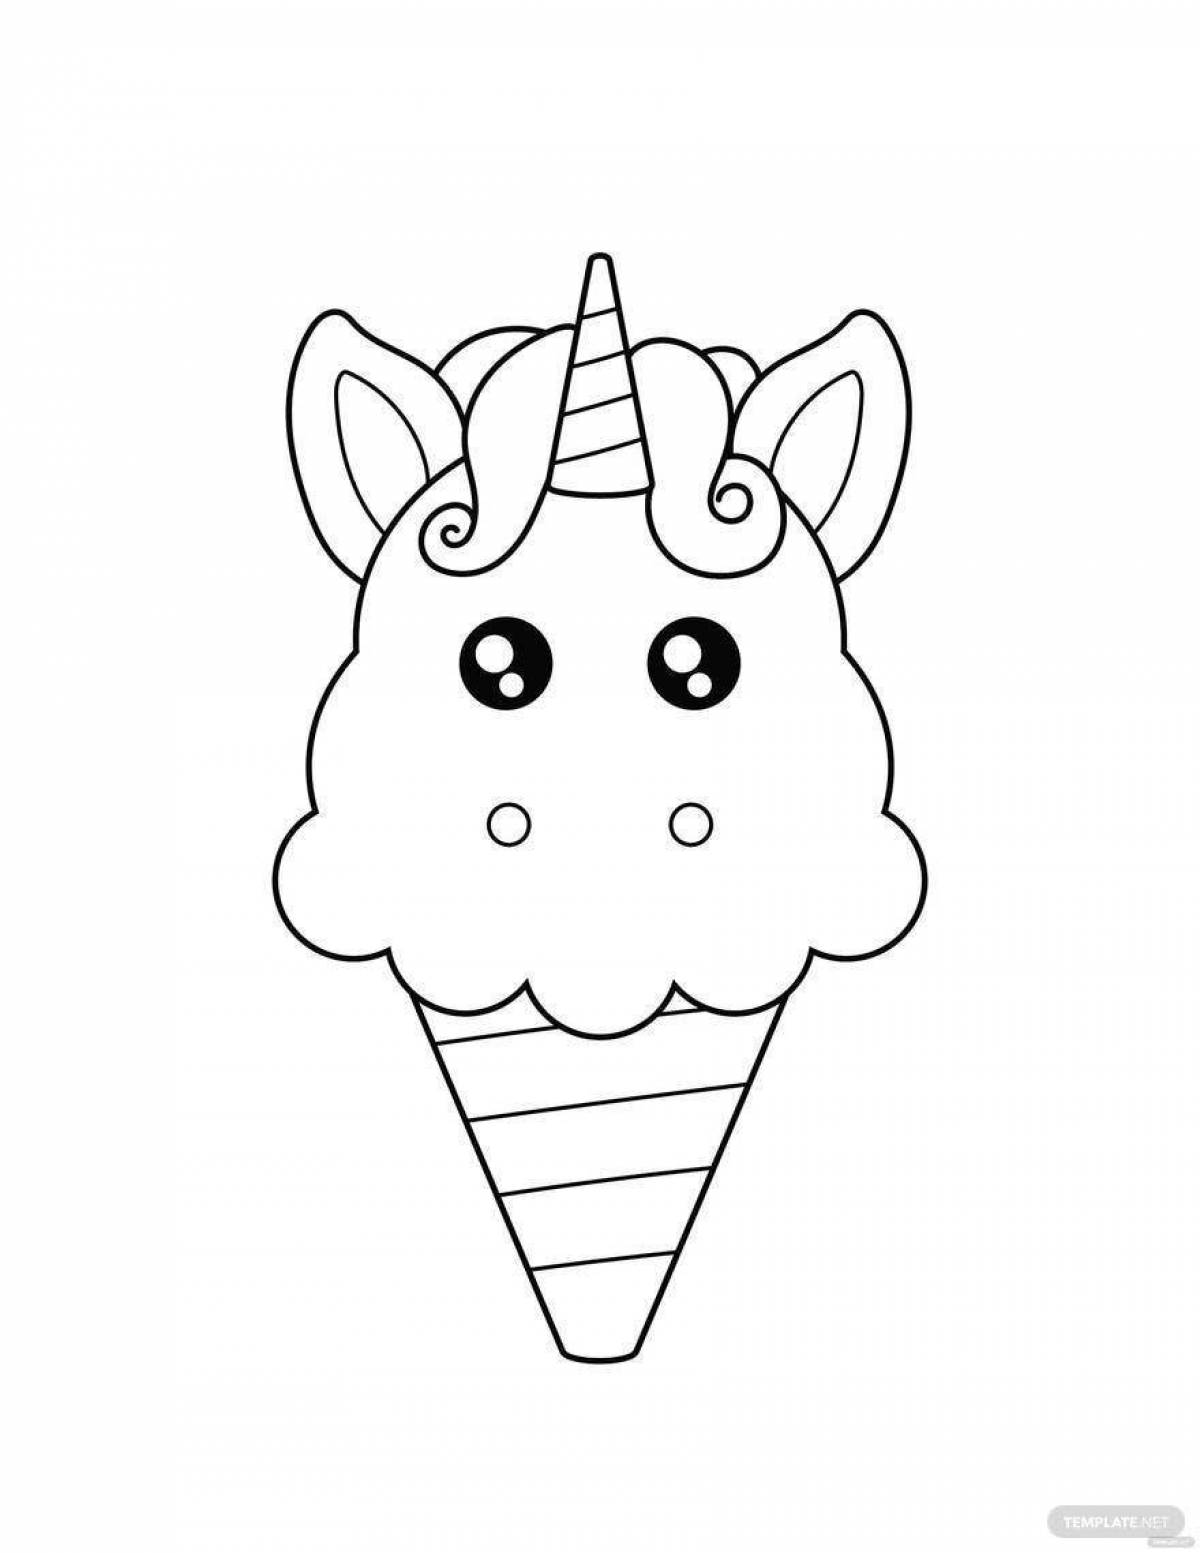 Incredible ice cream coloring book for kids